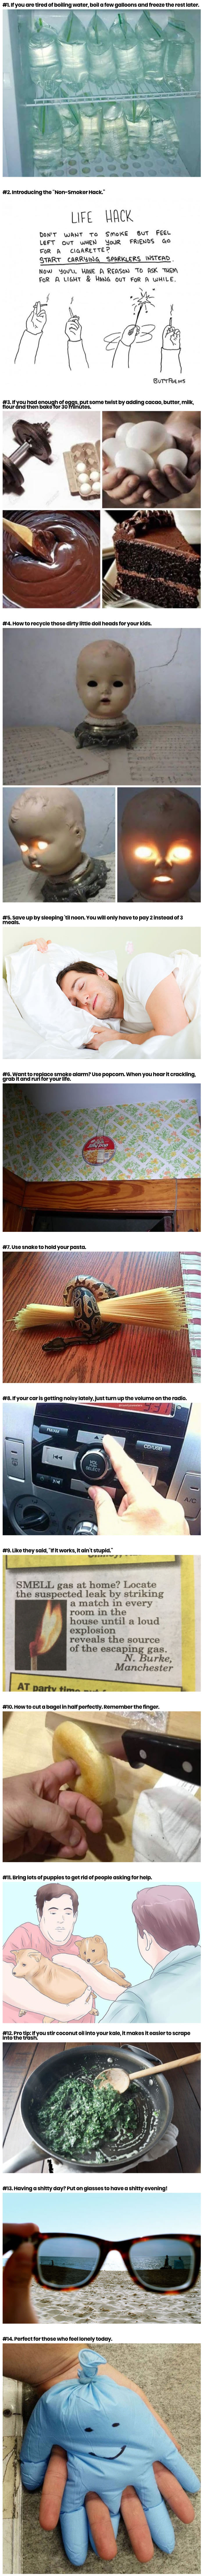 35 Useless Life Hacks That Are Hilarious And Terrible 1